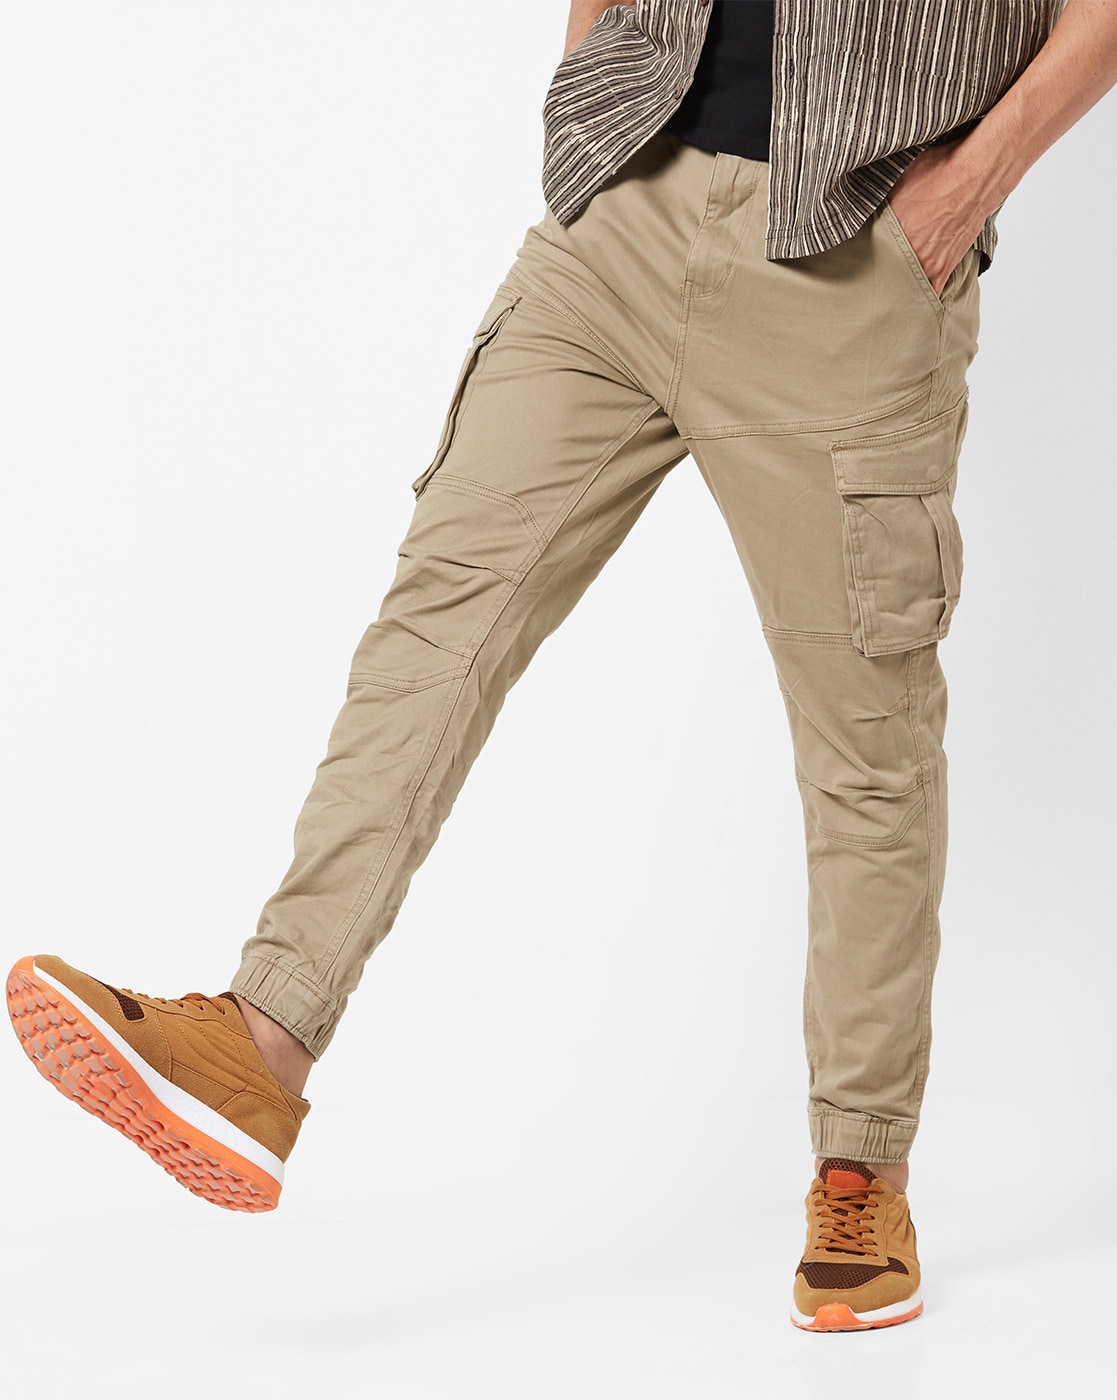 Buy Grey Trousers & Pants for Men by OLD GREY Online | Ajio.com